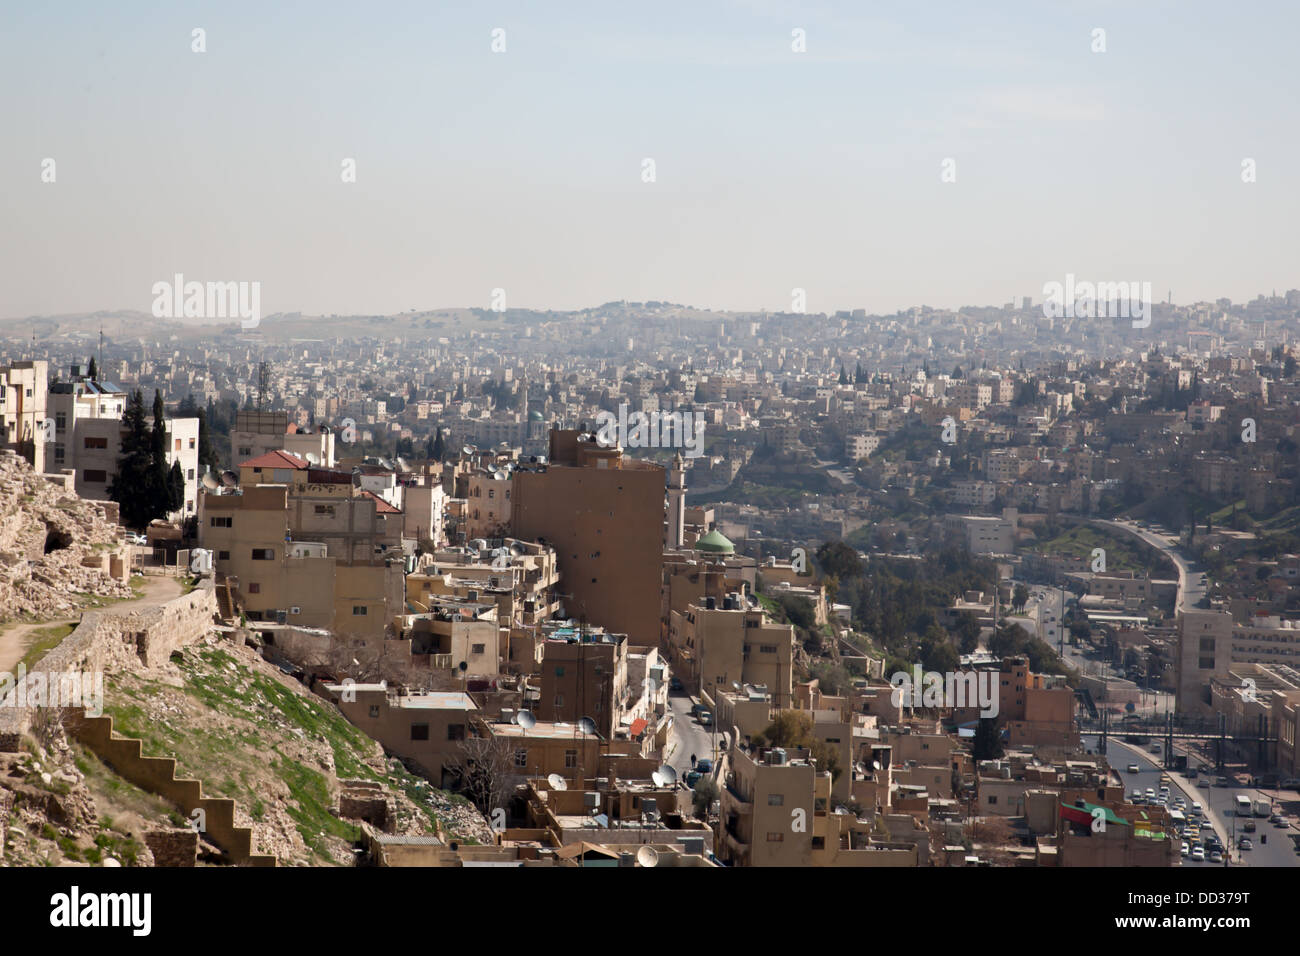 Amman, Jordan, from the Citadel. CIRCA Feb. 2013. Ruins in the middle of a Middle East City Stock Photo